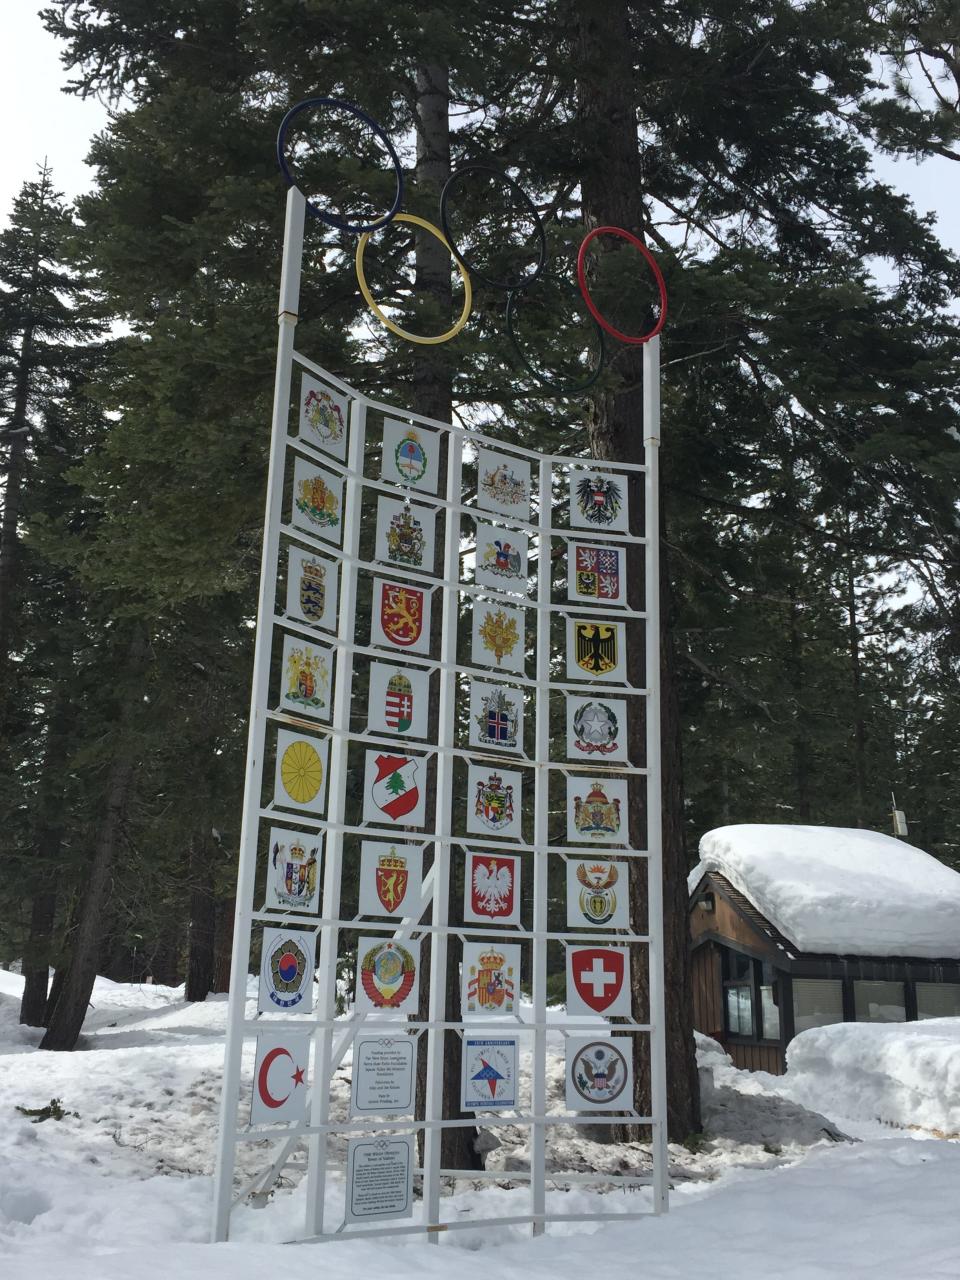 Sugar Pine State Park, Tahoe’s west shore, offers ski trails from 1960 Olympics.